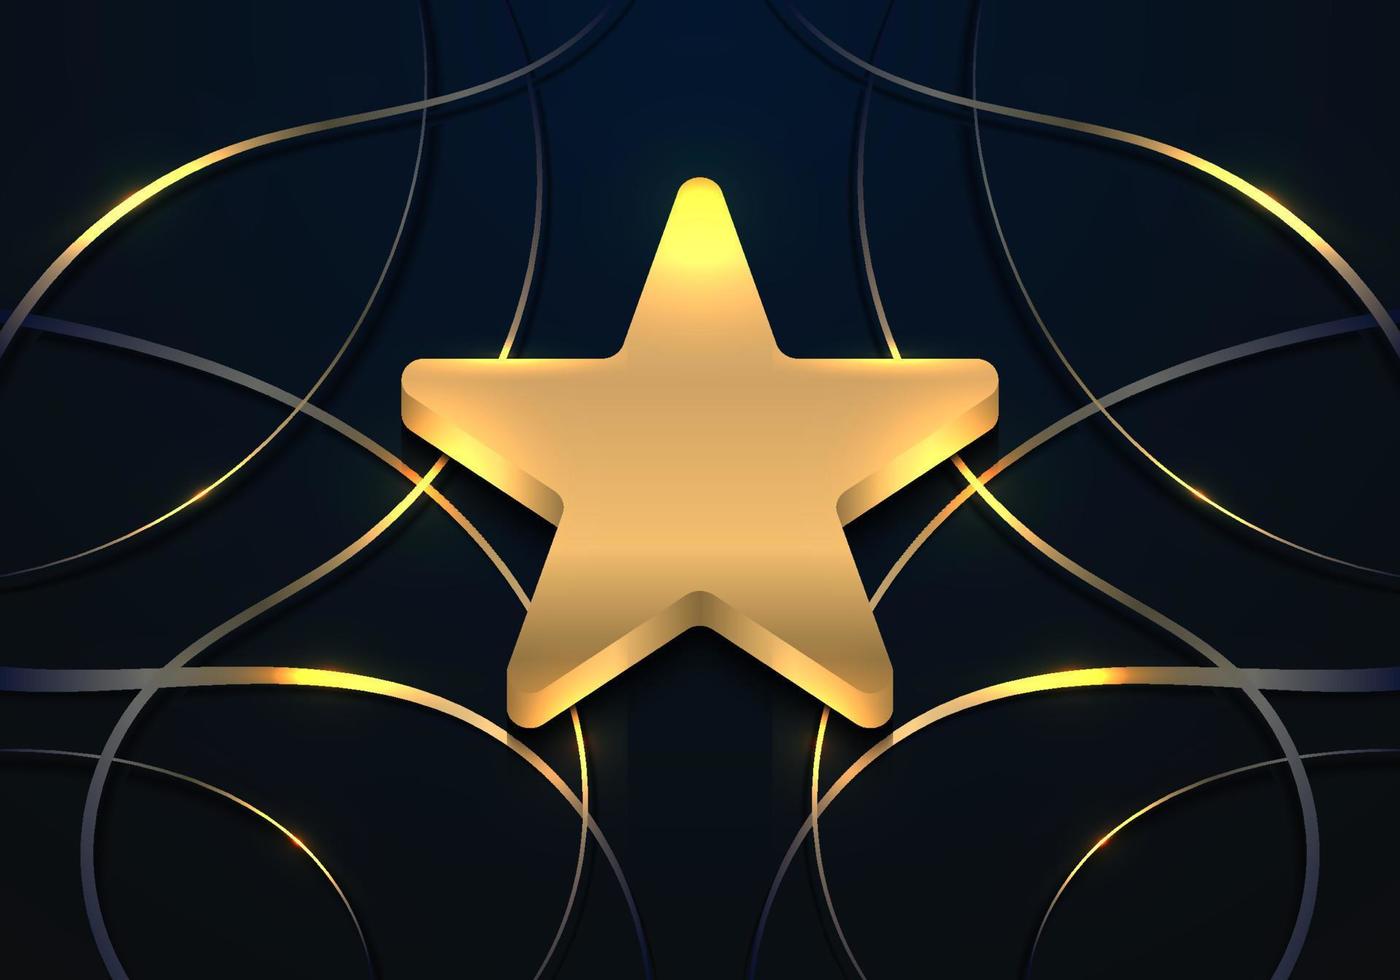 Luxury 3D golden star award badge with abstract wavy gold lines elements on dark blue background vector